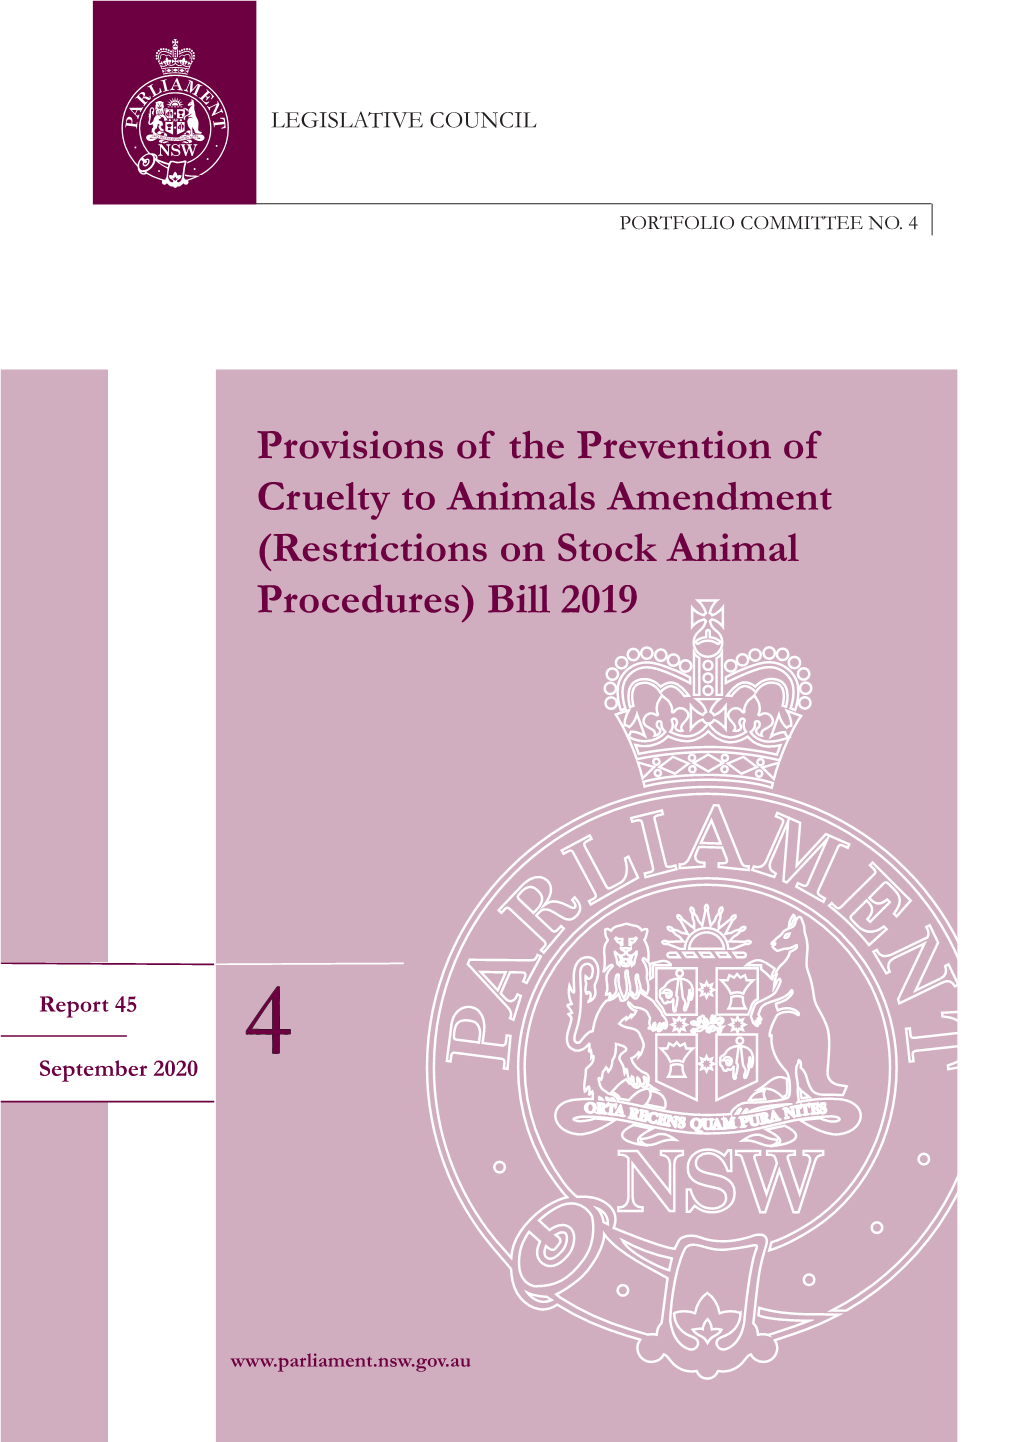 Prevention of Cruelty to Animals Amendment (Restrictions on Stock Animal Procedures) Bill 2019